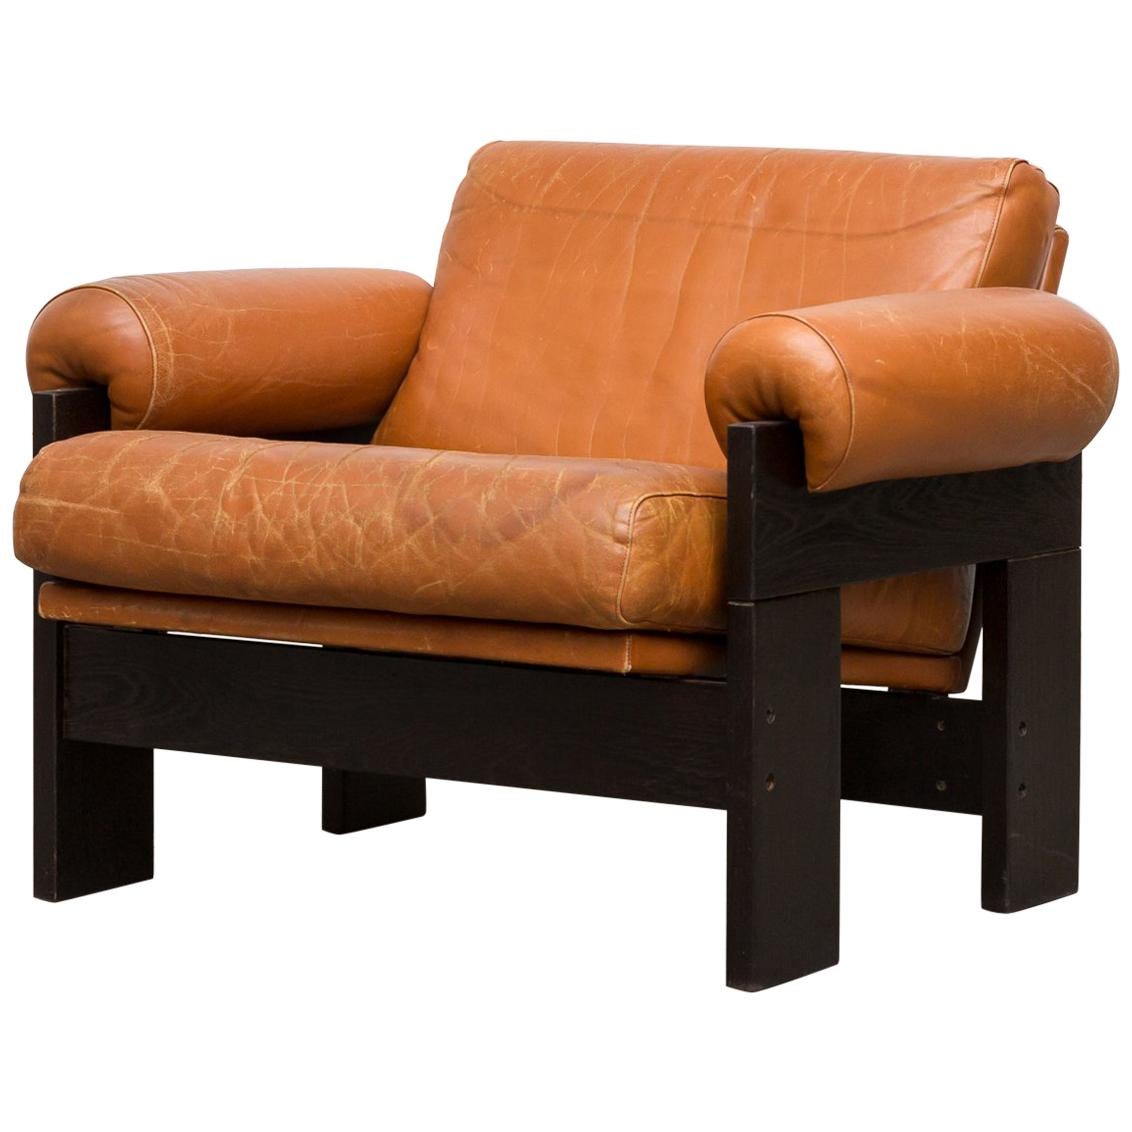 Martin Visser Rust Leather and Wenge Lounge Chair